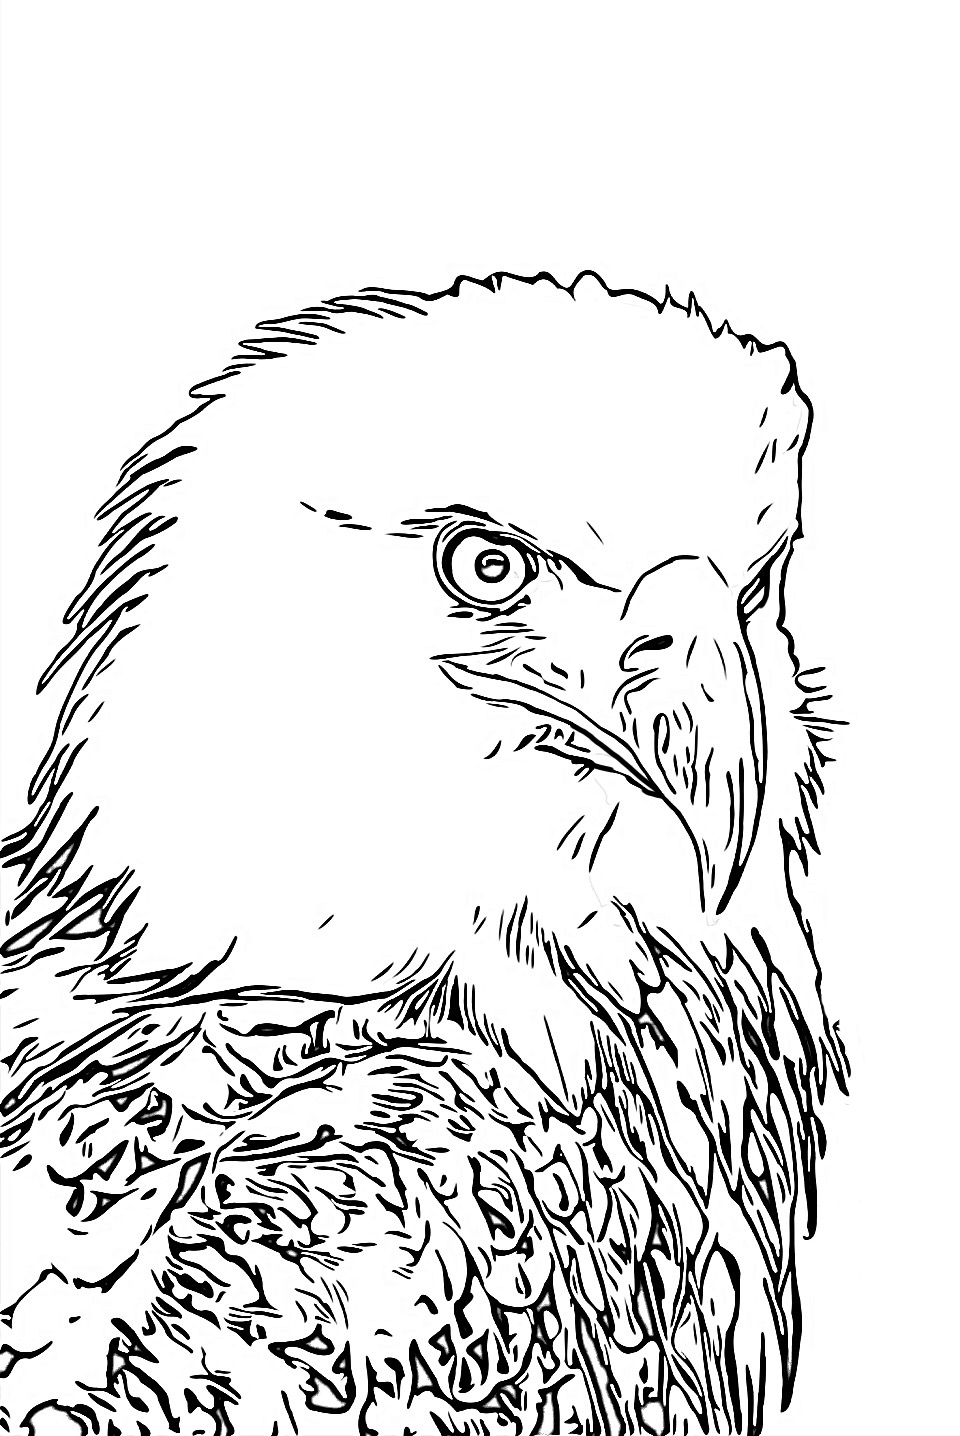 Eagle king of the skies coloring page